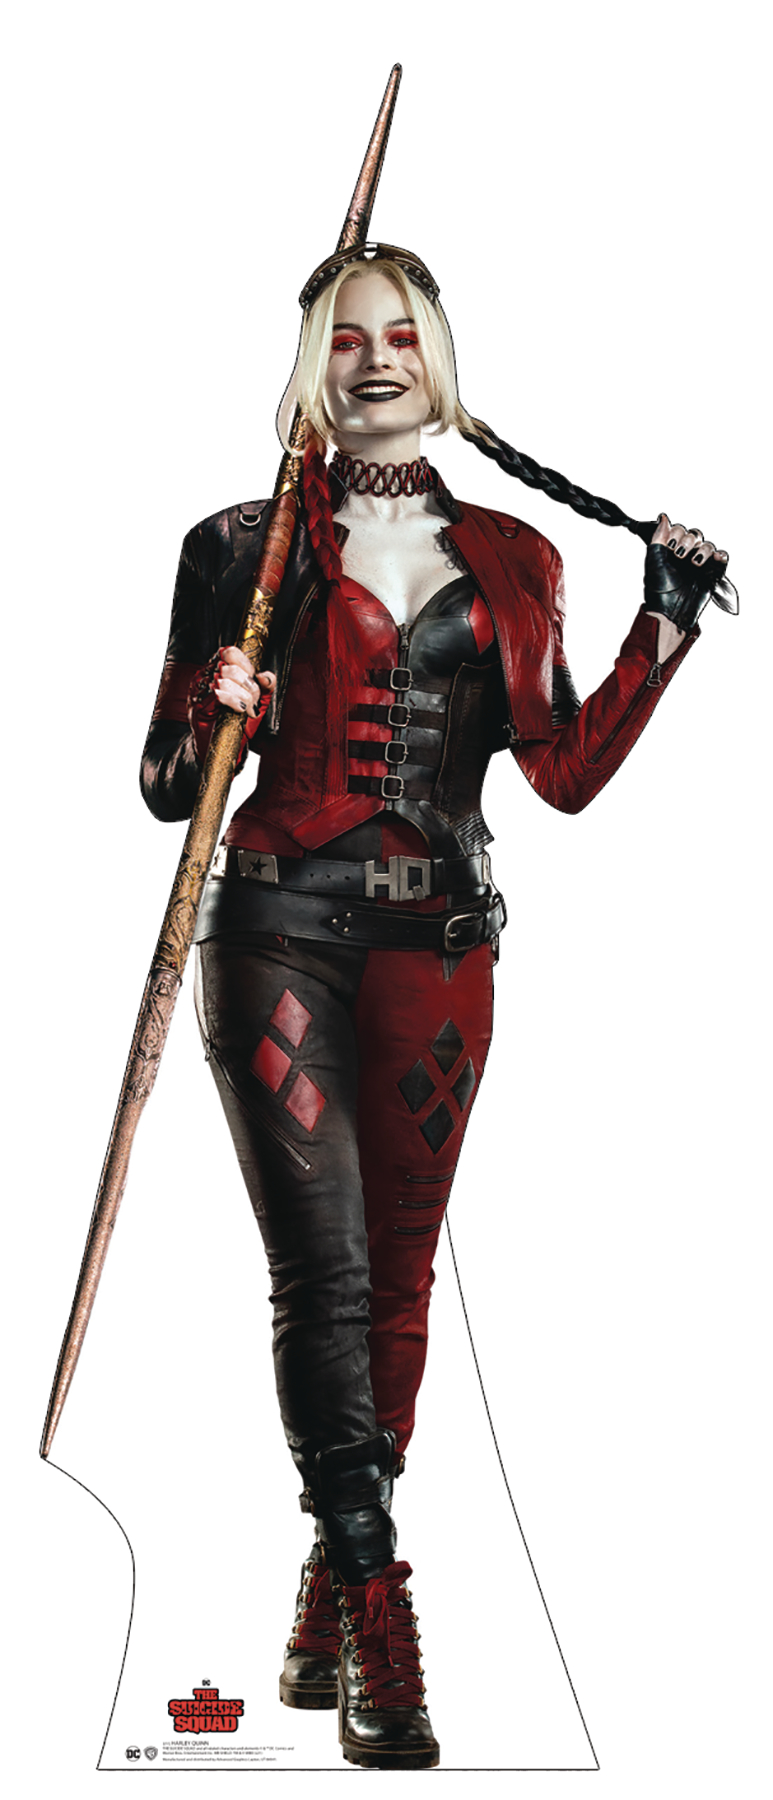 Wb The Suicide Squad 2 Harley Quinn Standee